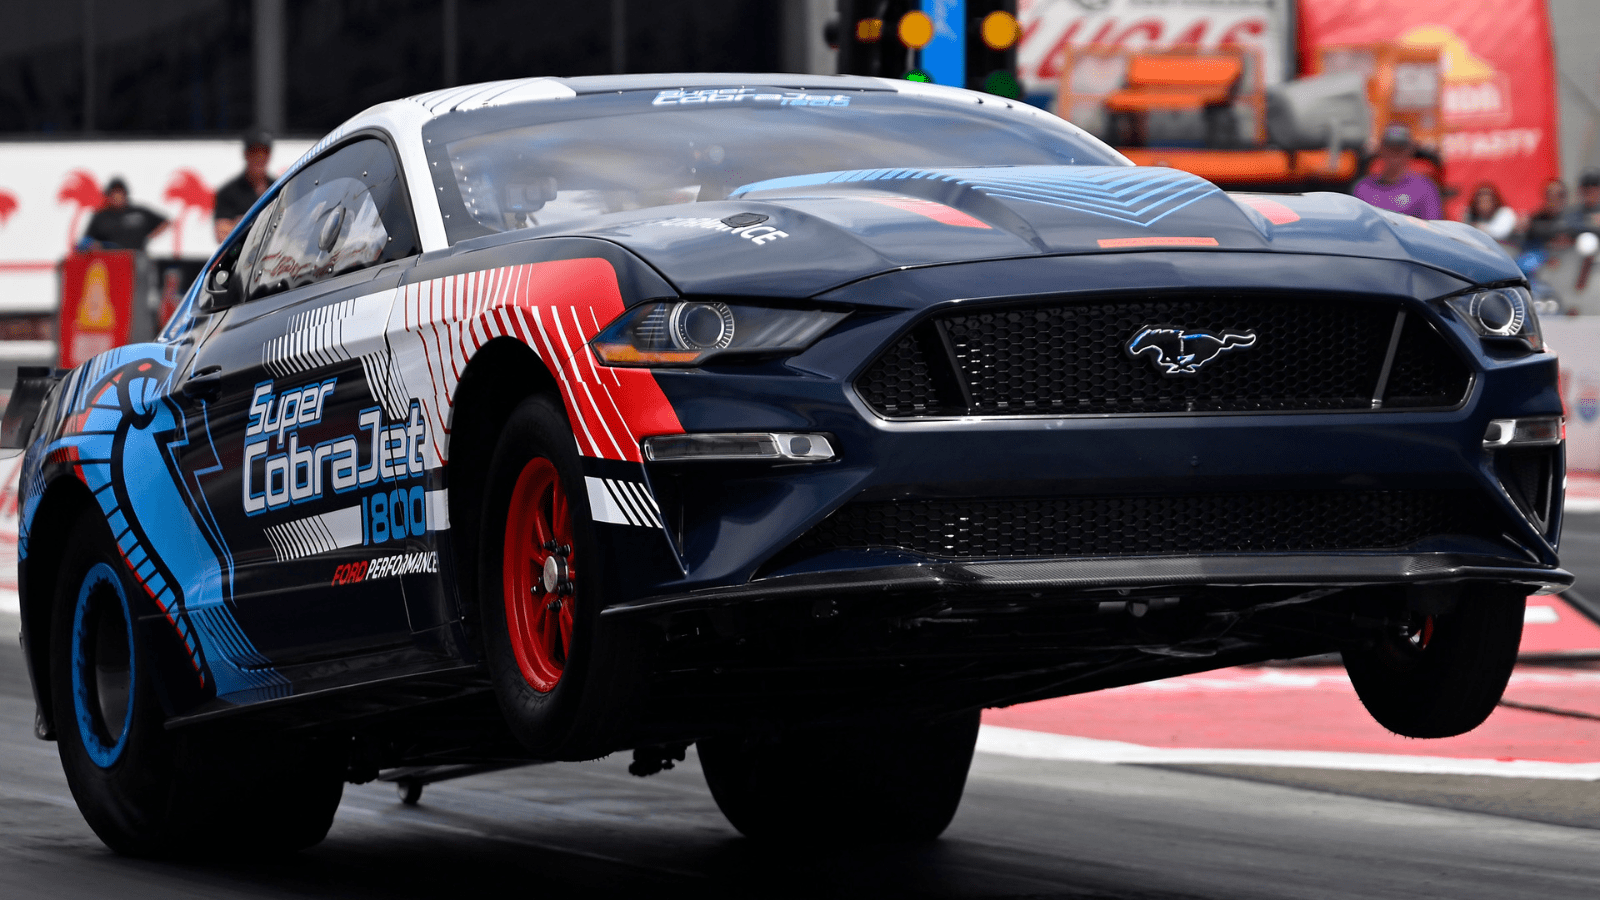 Ford Performance: The Ultimate Guide To Drag Racing